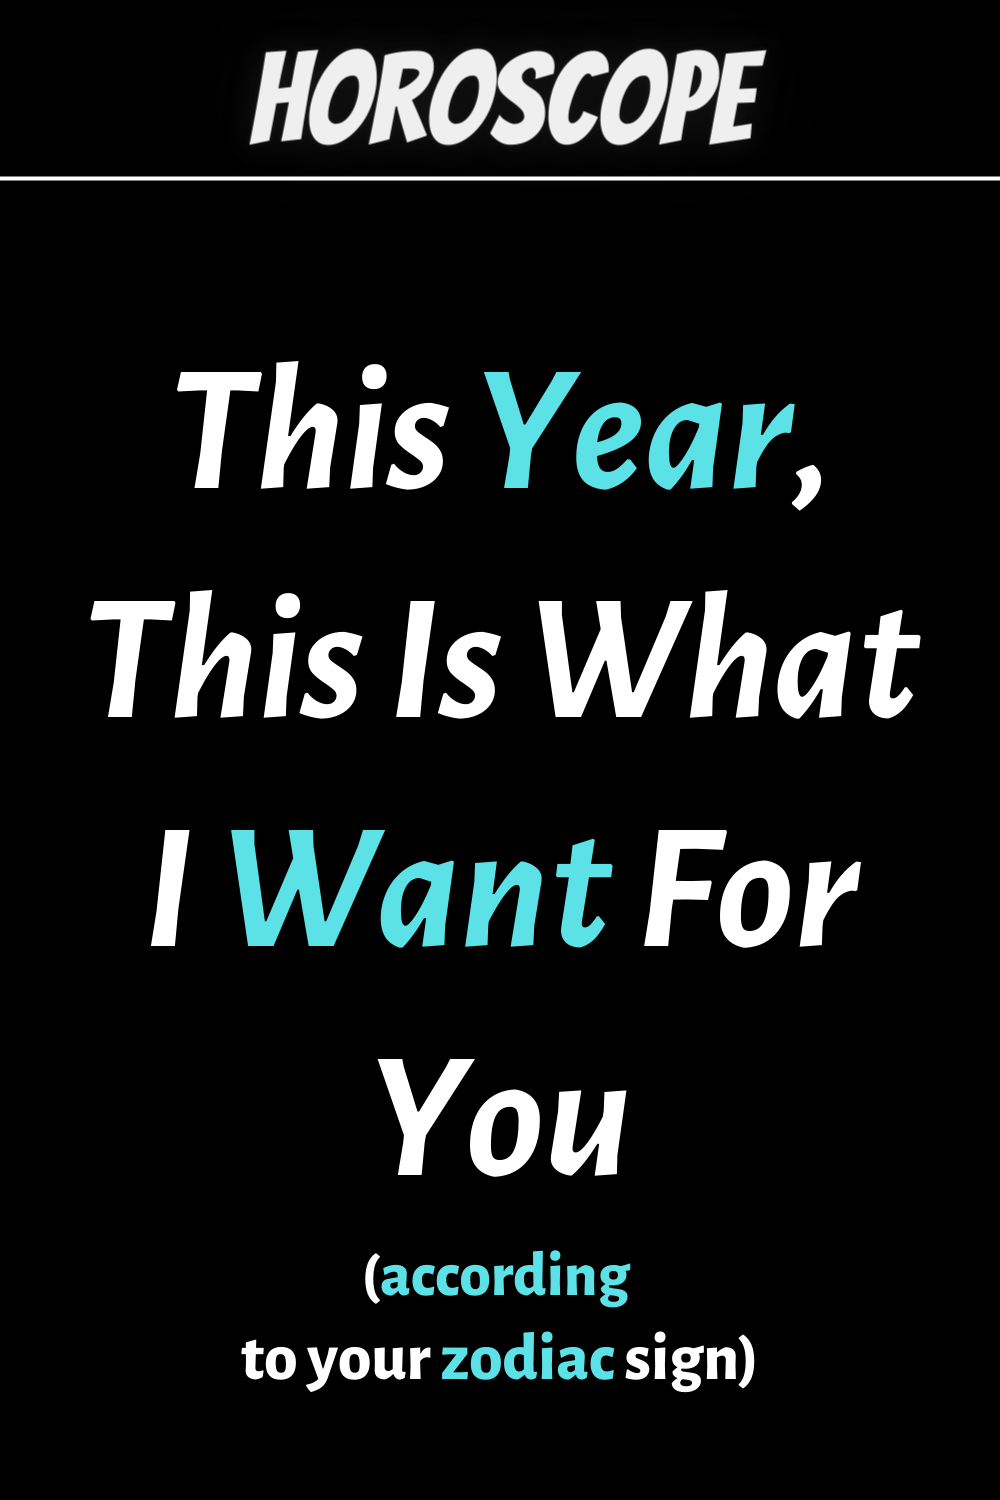 This Year, This Is What I Want For You